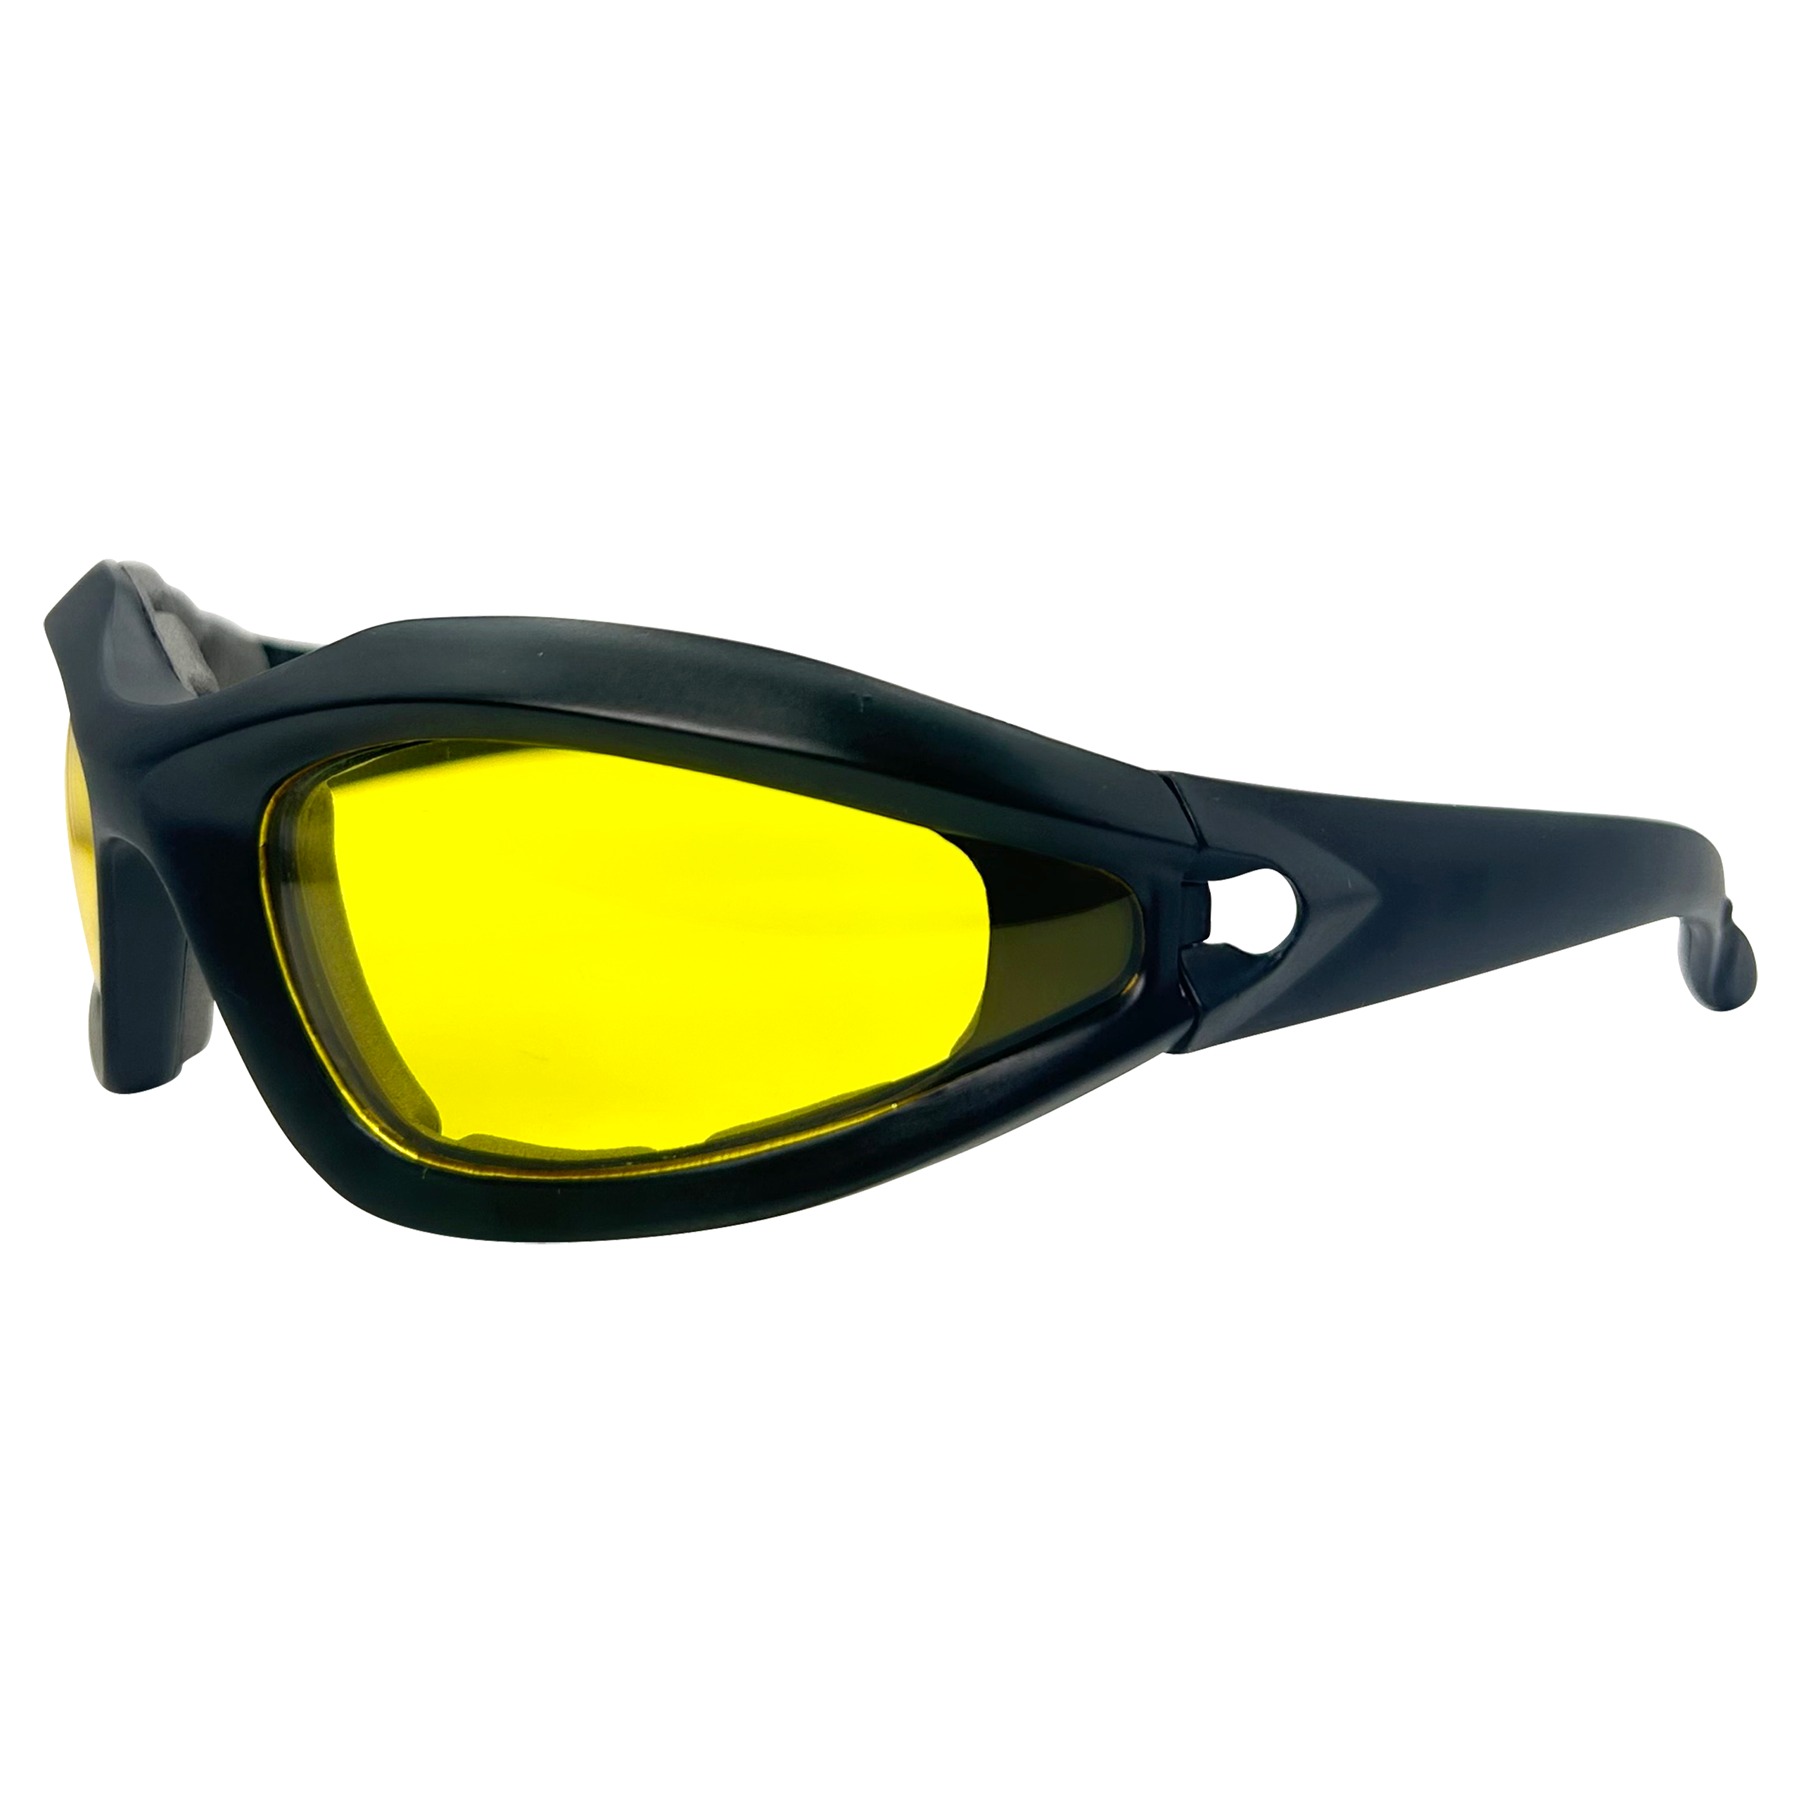 shield sunglasses womens and unisex with yellowflash lens